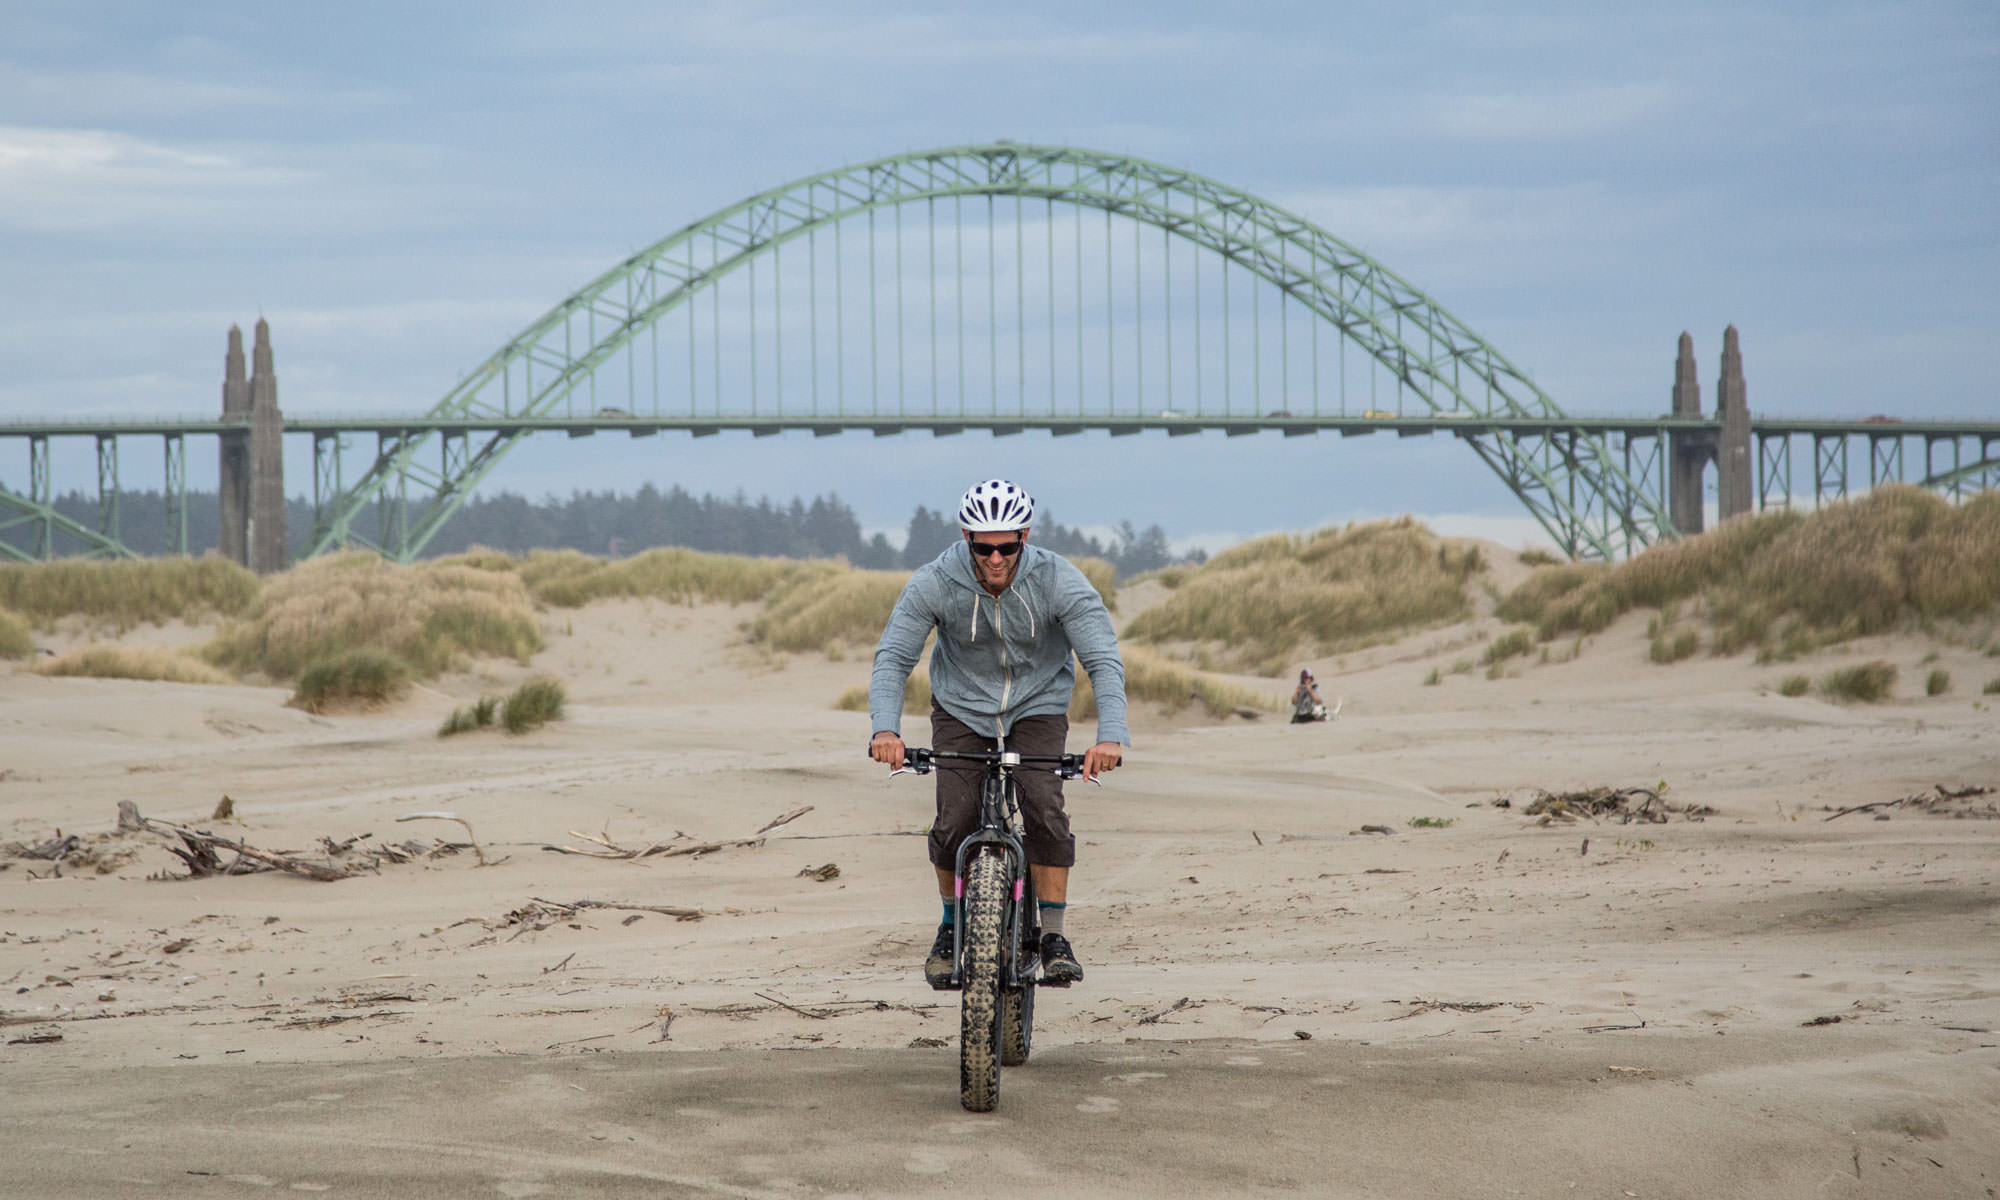 The green Newport Bridge looms in the background as a man gleefully rides a fat bike on the sand.